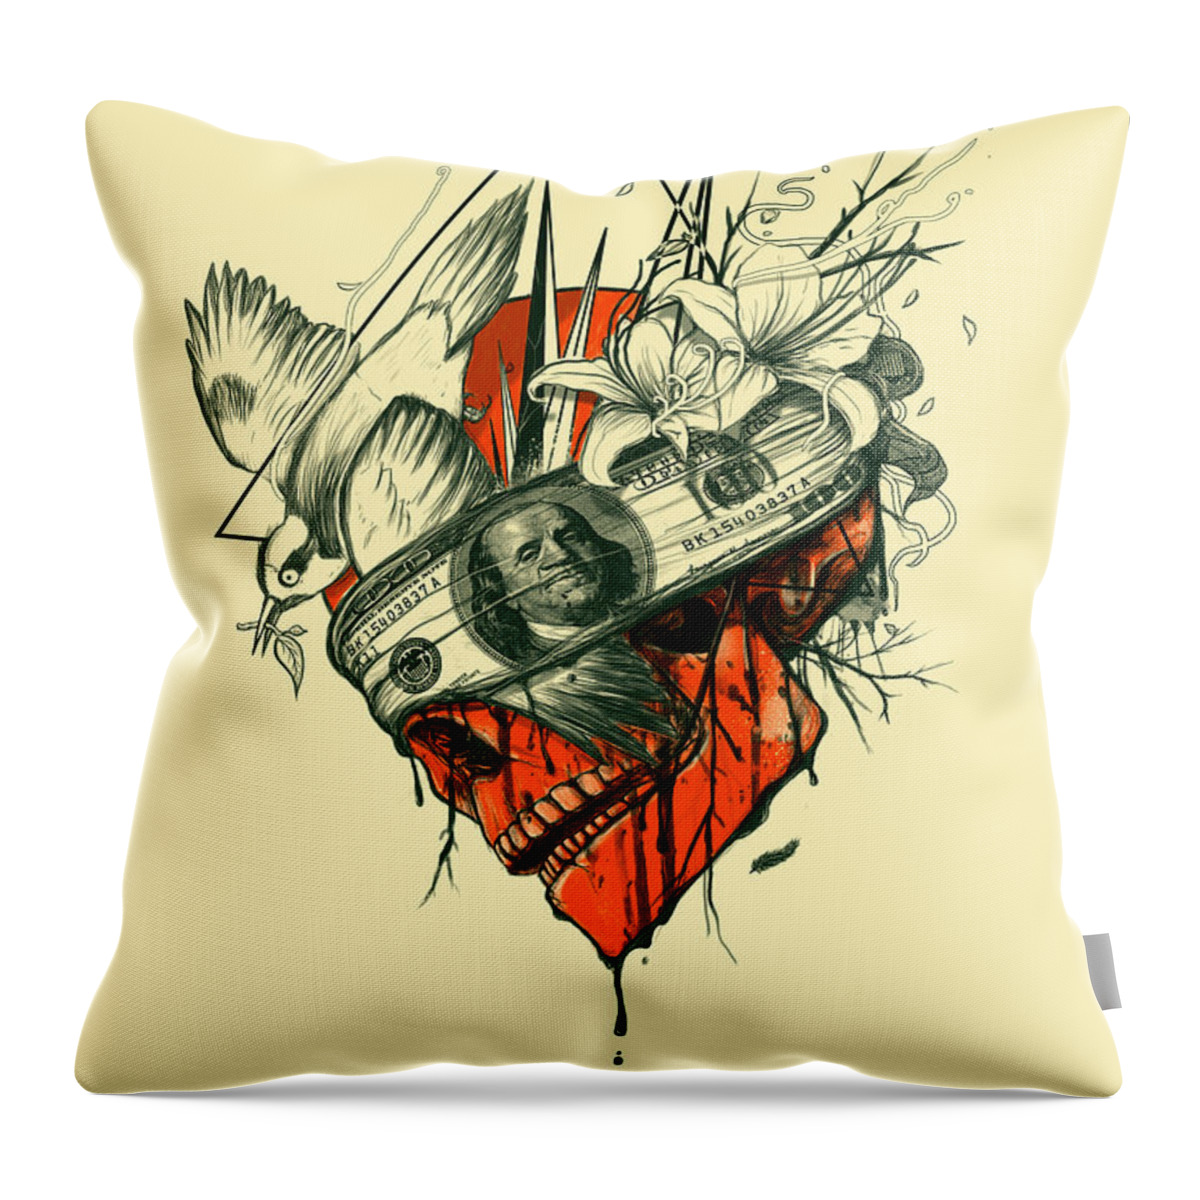 Skull Throw Pillow featuring the digital art Blind by Nicebleed 